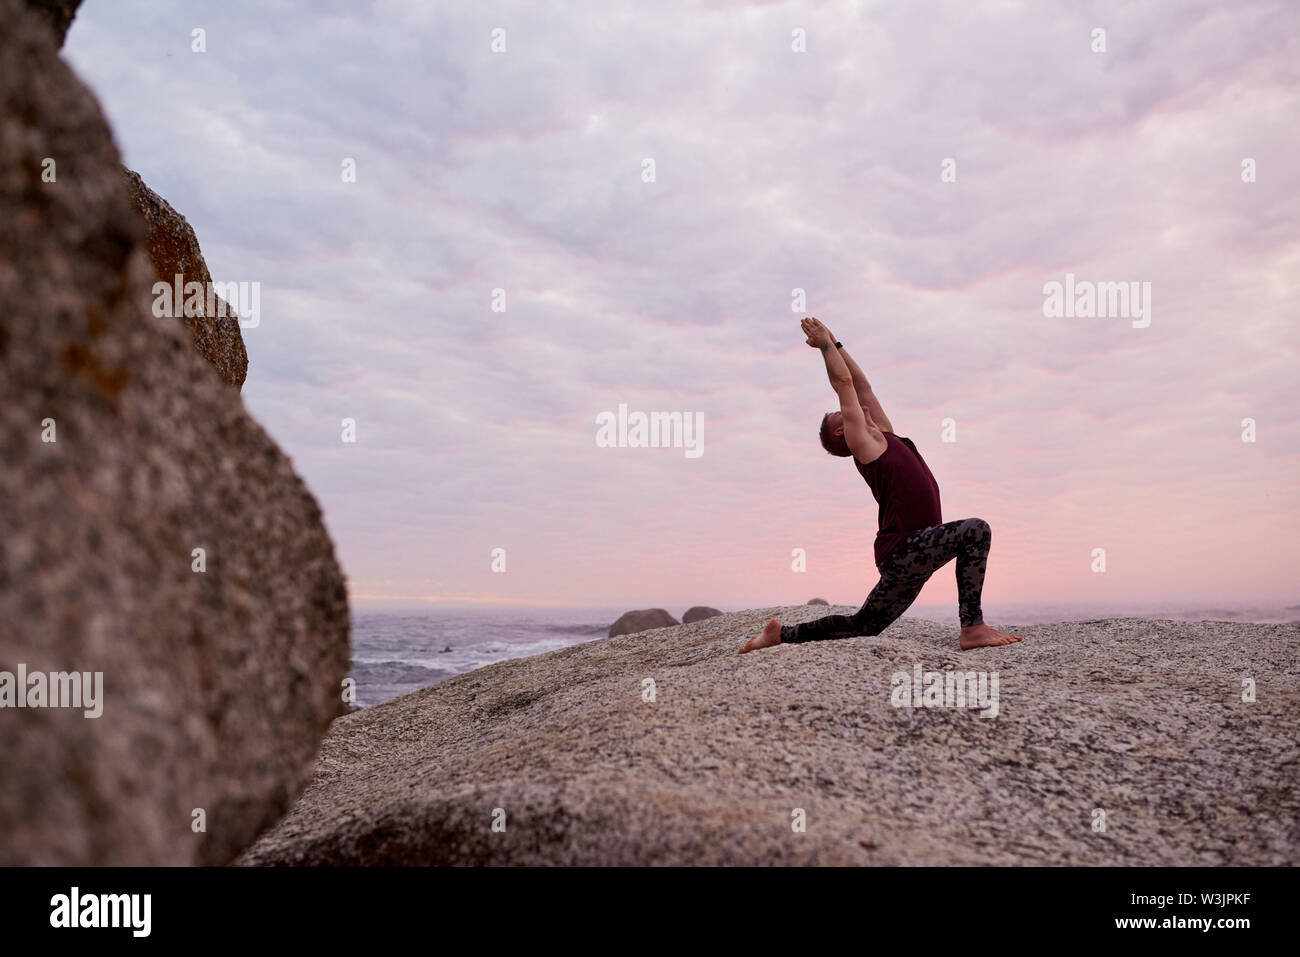 Man doing the cresent lunge pose on rocks at dusk Stock Photo